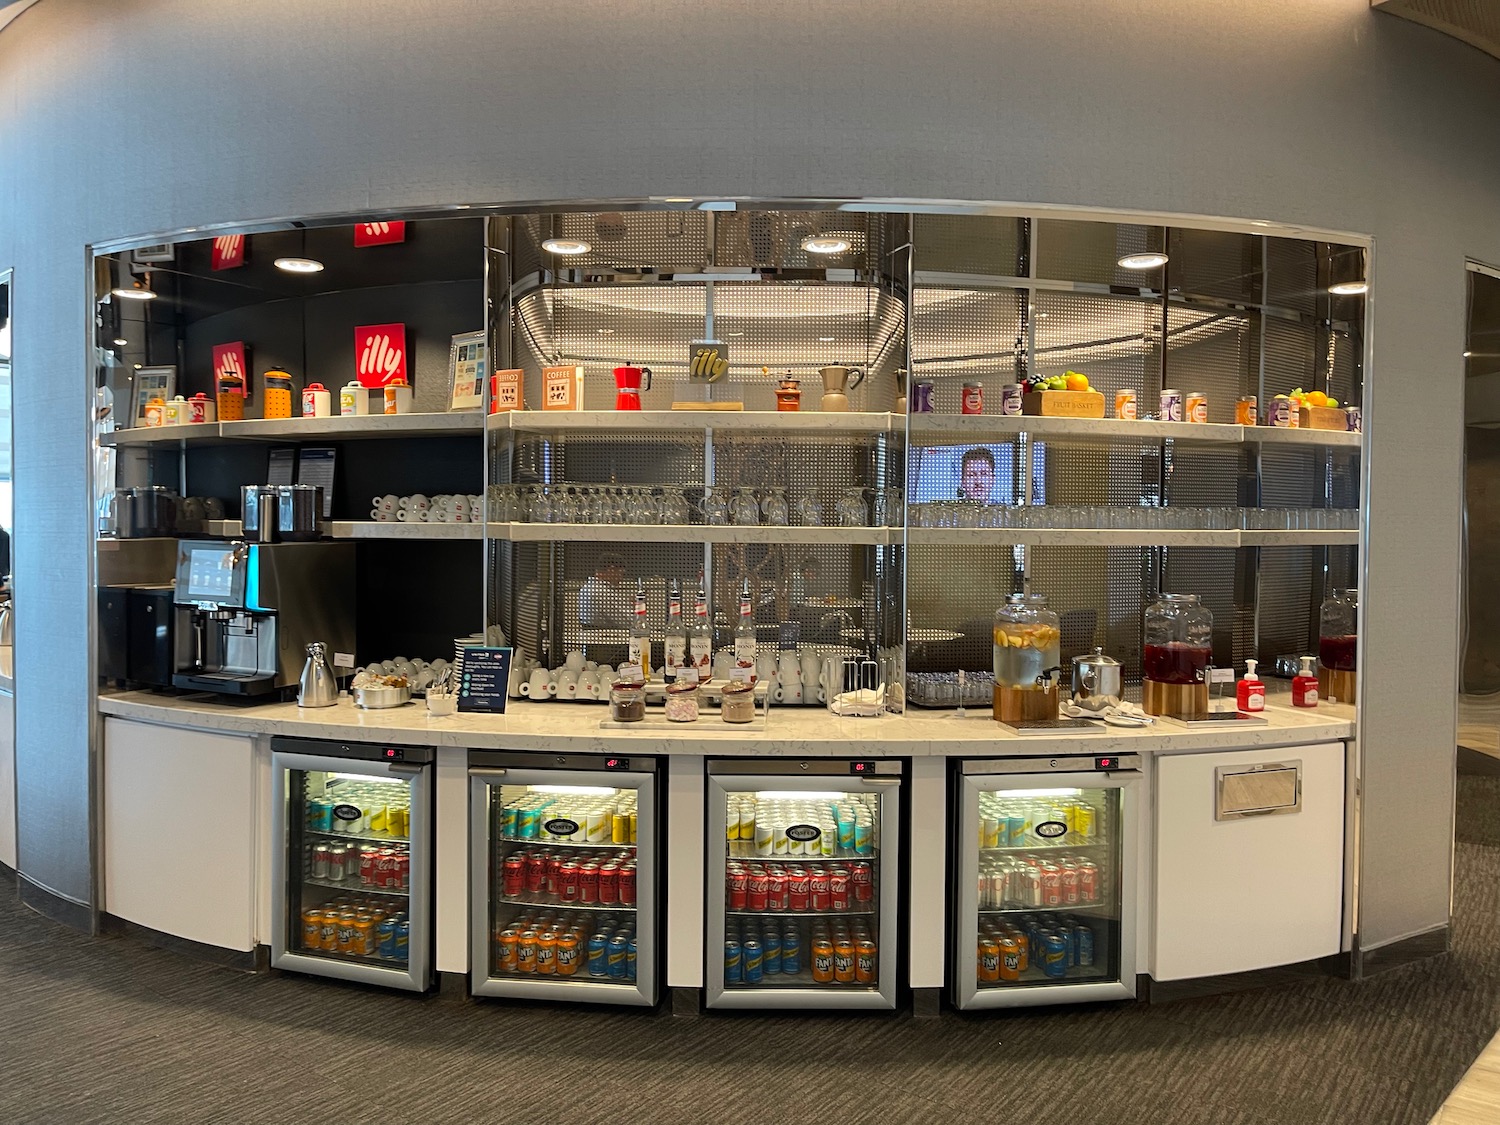 a counter with drinks and beverages